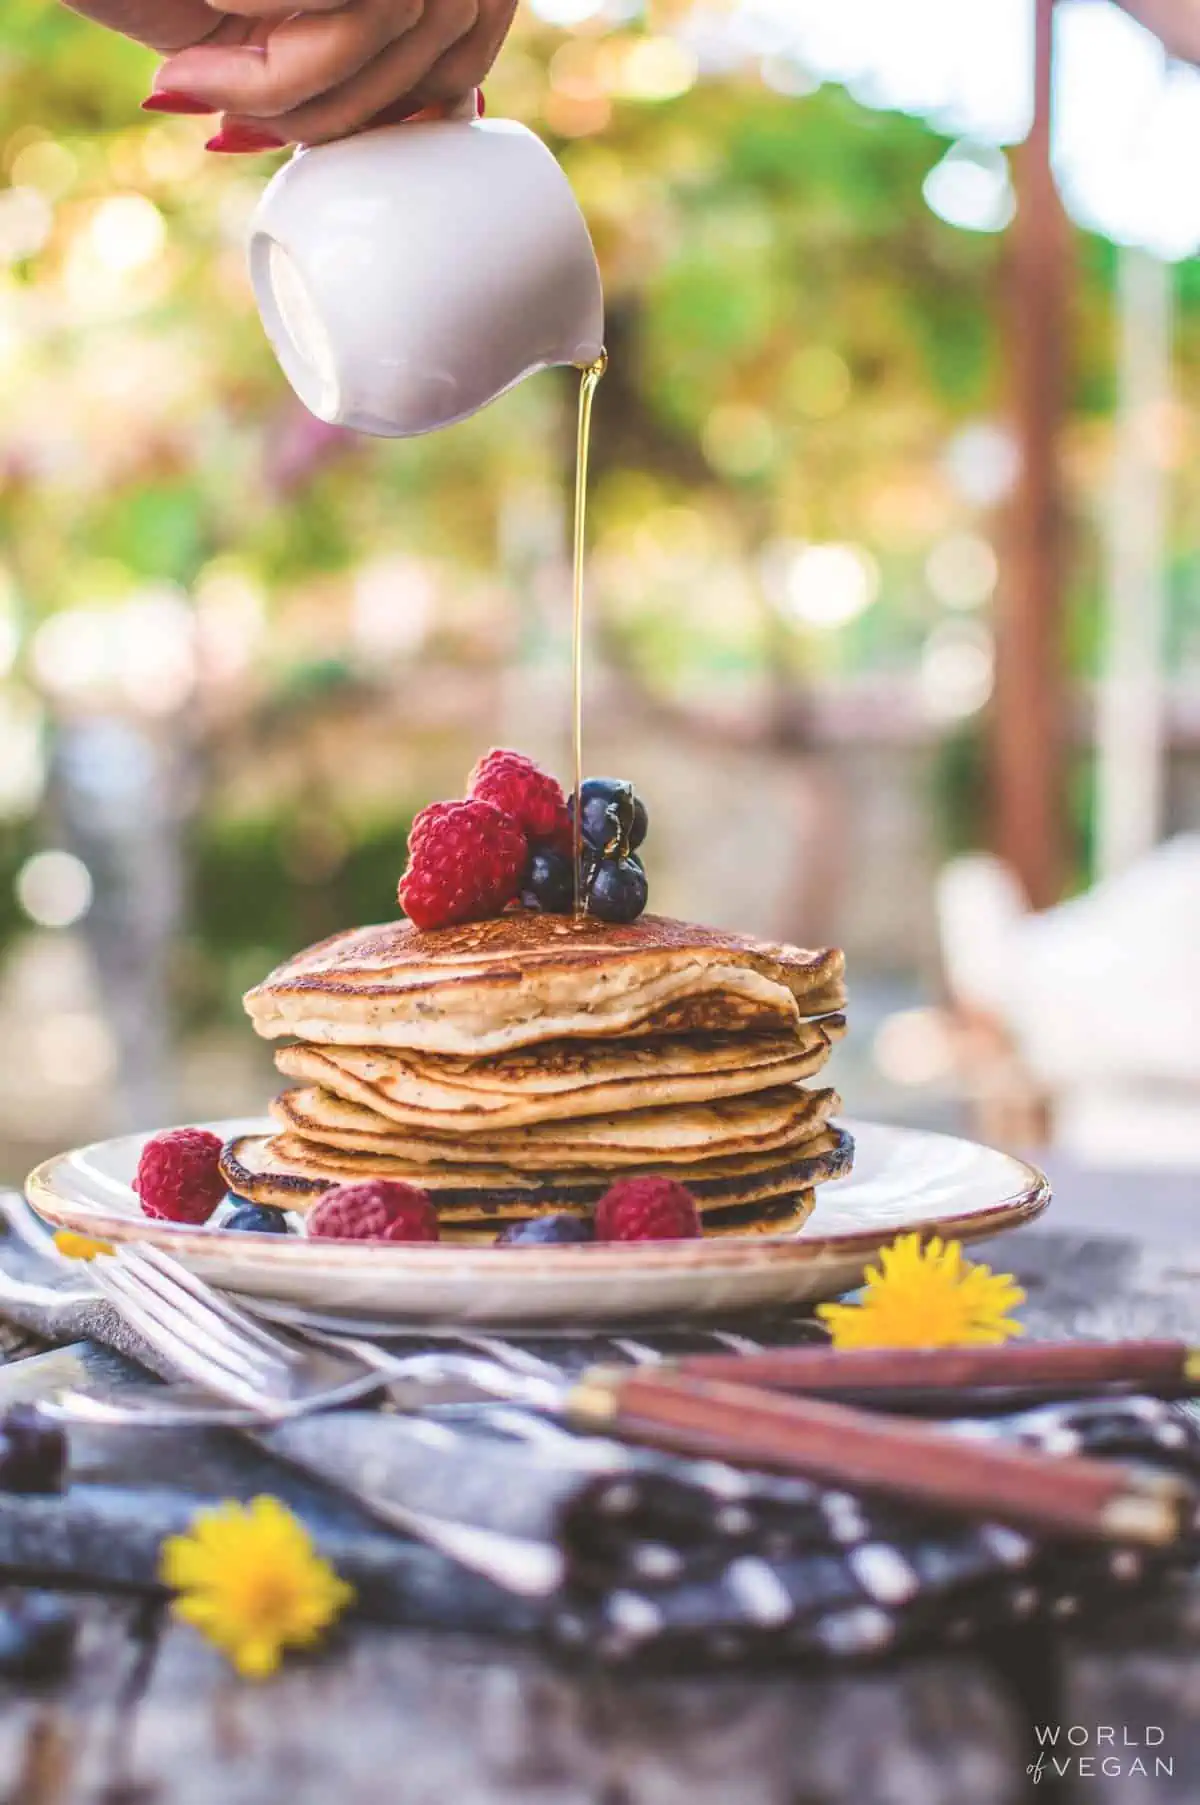 Stack of vegan pancakes on a plate, with maple syrup being poured over the top.